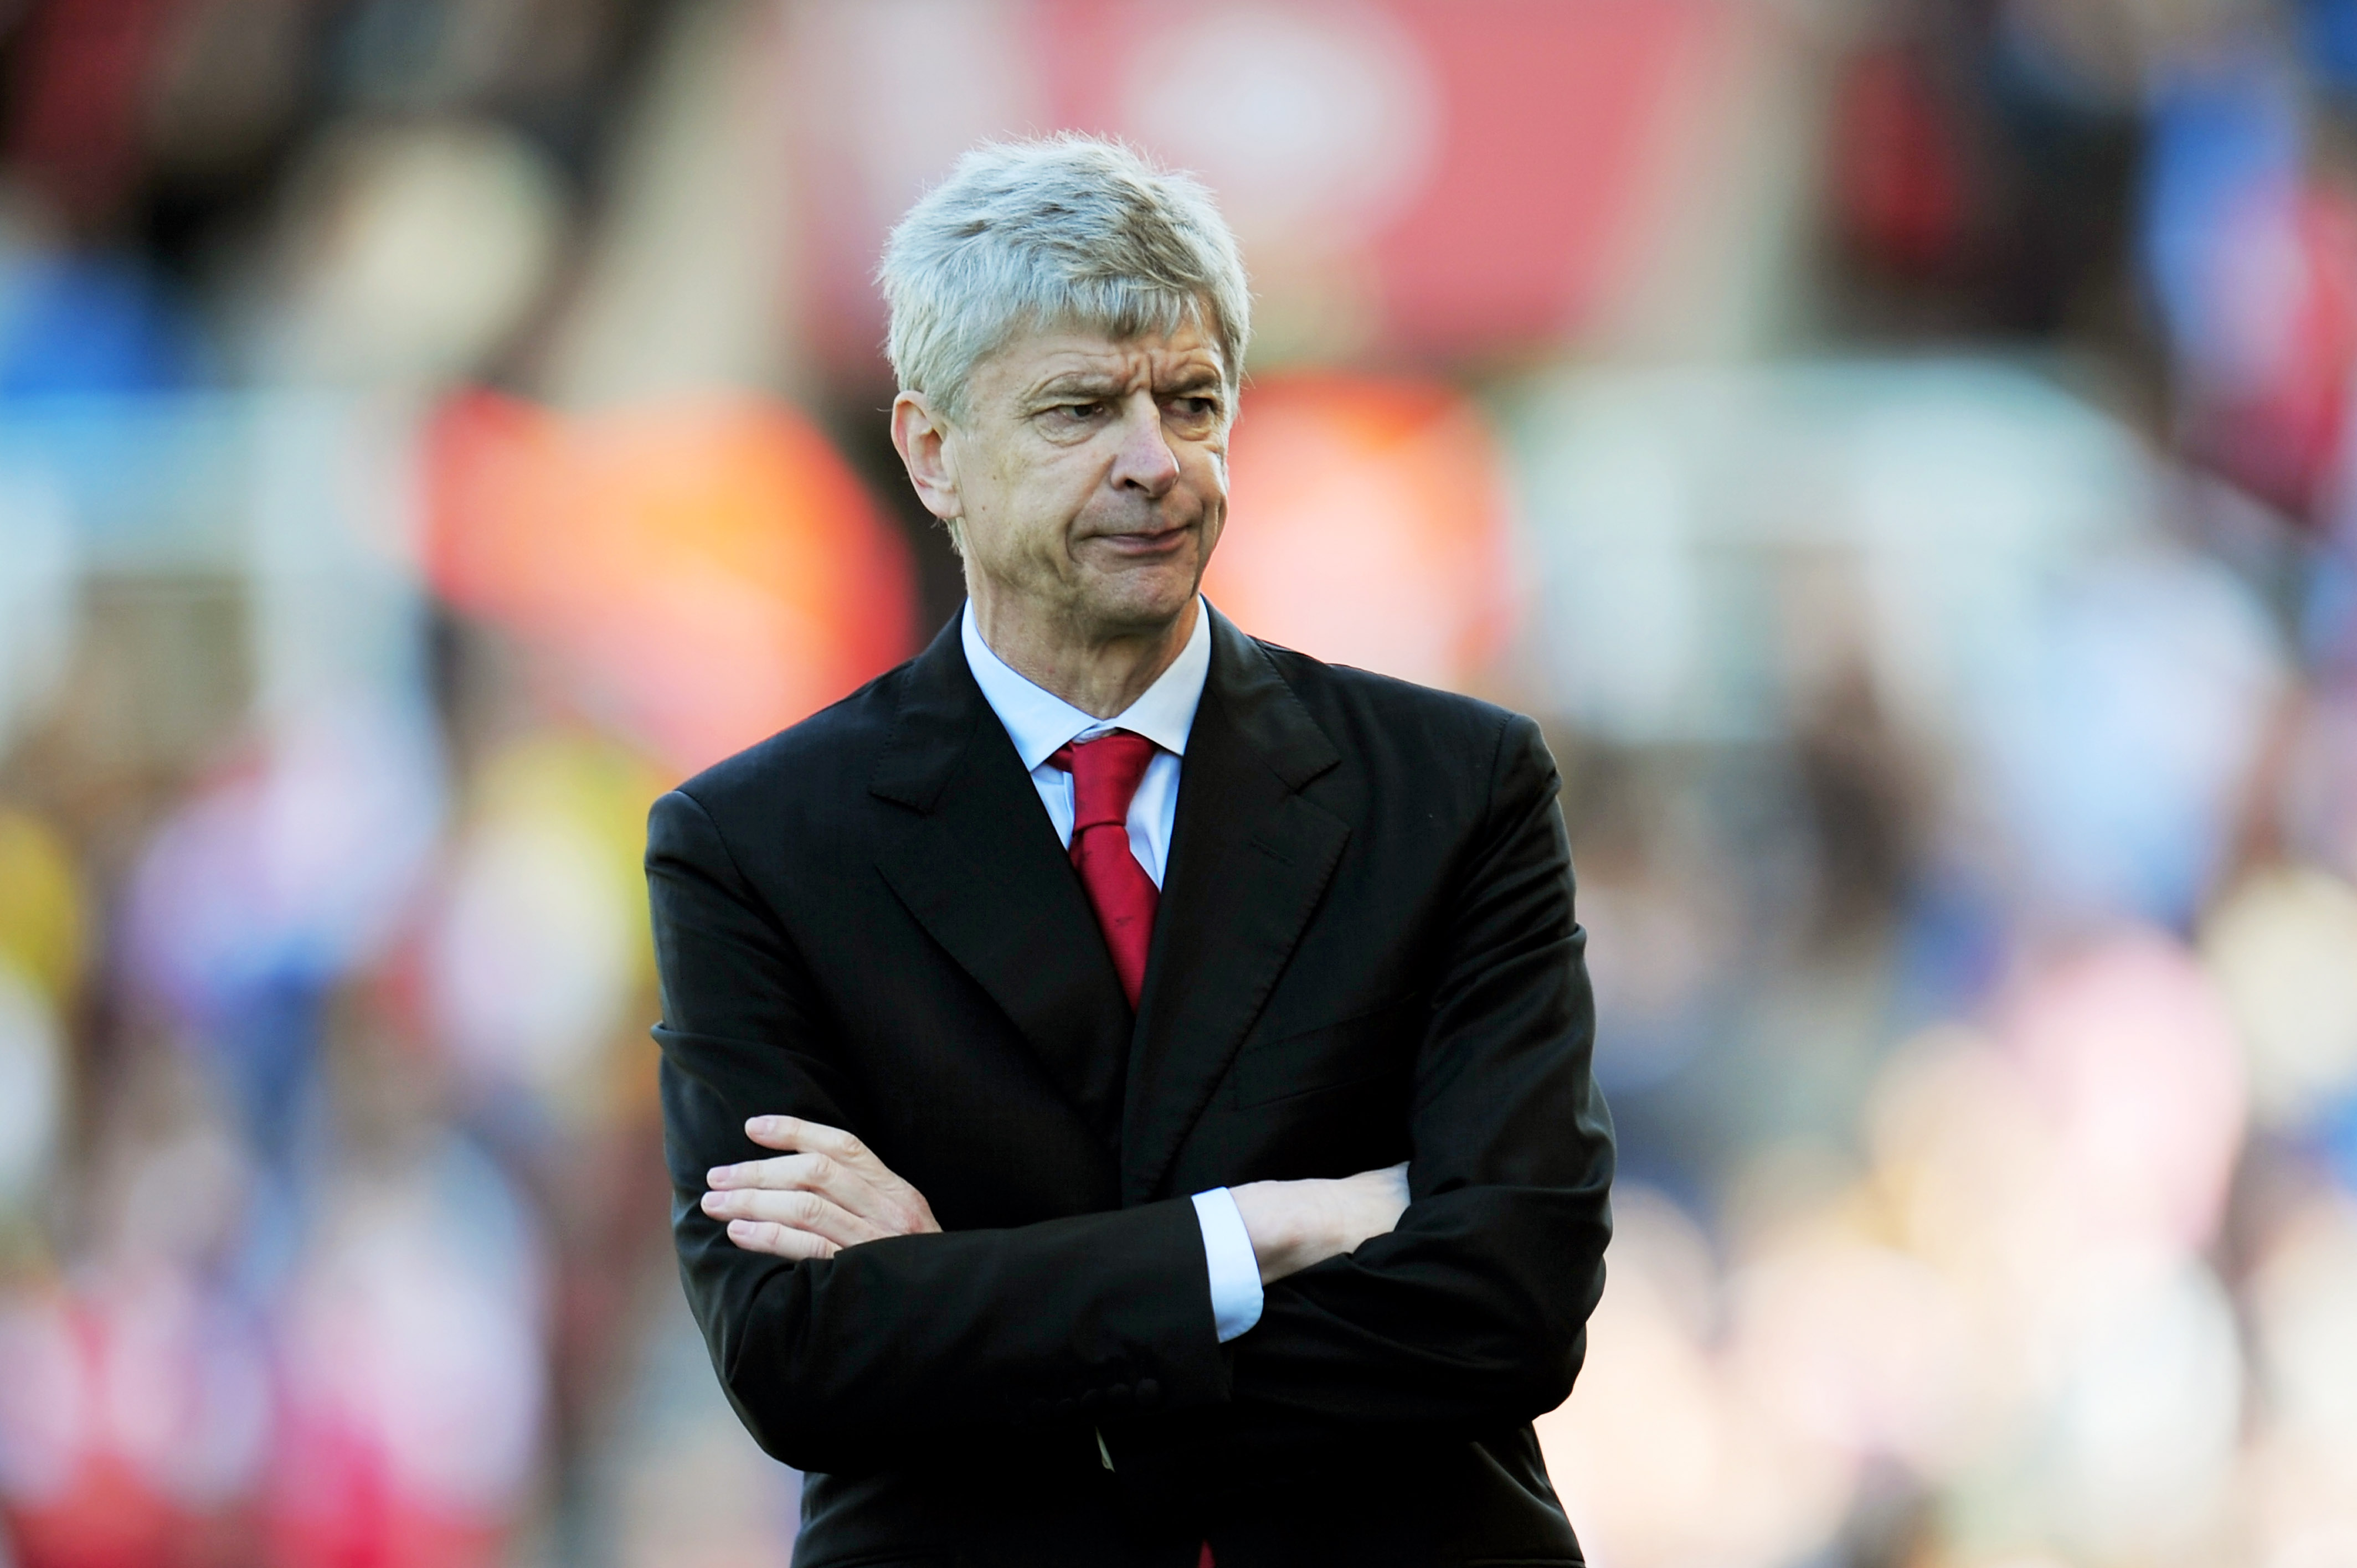 STOKE ON TRENT, ENGLAND - MAY 08:  A dejected Arsene Wenger the Arsenal manager looks on as his team head towards a 3-1 defeat during the Barclays Premier League match between Stoke City and Arsenal at the Britannia Stadium on May 8, 2011 in Stoke on Tren